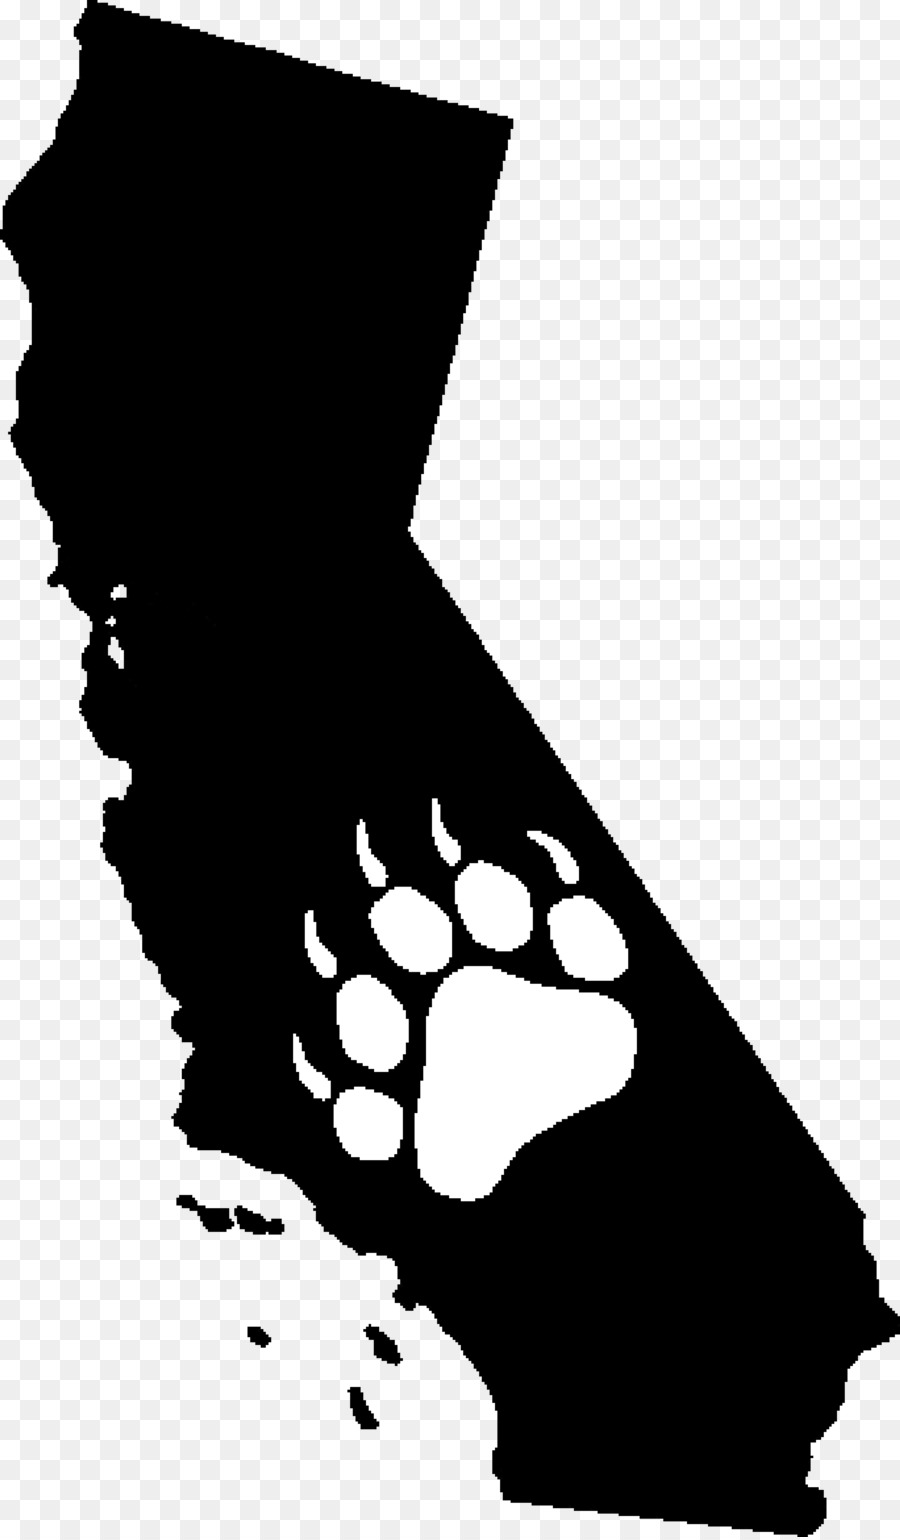 Los Angeles American black bear California grizzly bear Frazier Industrial Co Clip art - California Bear png download - 3000*5123 - Free Transparent Los Angeles png Download.